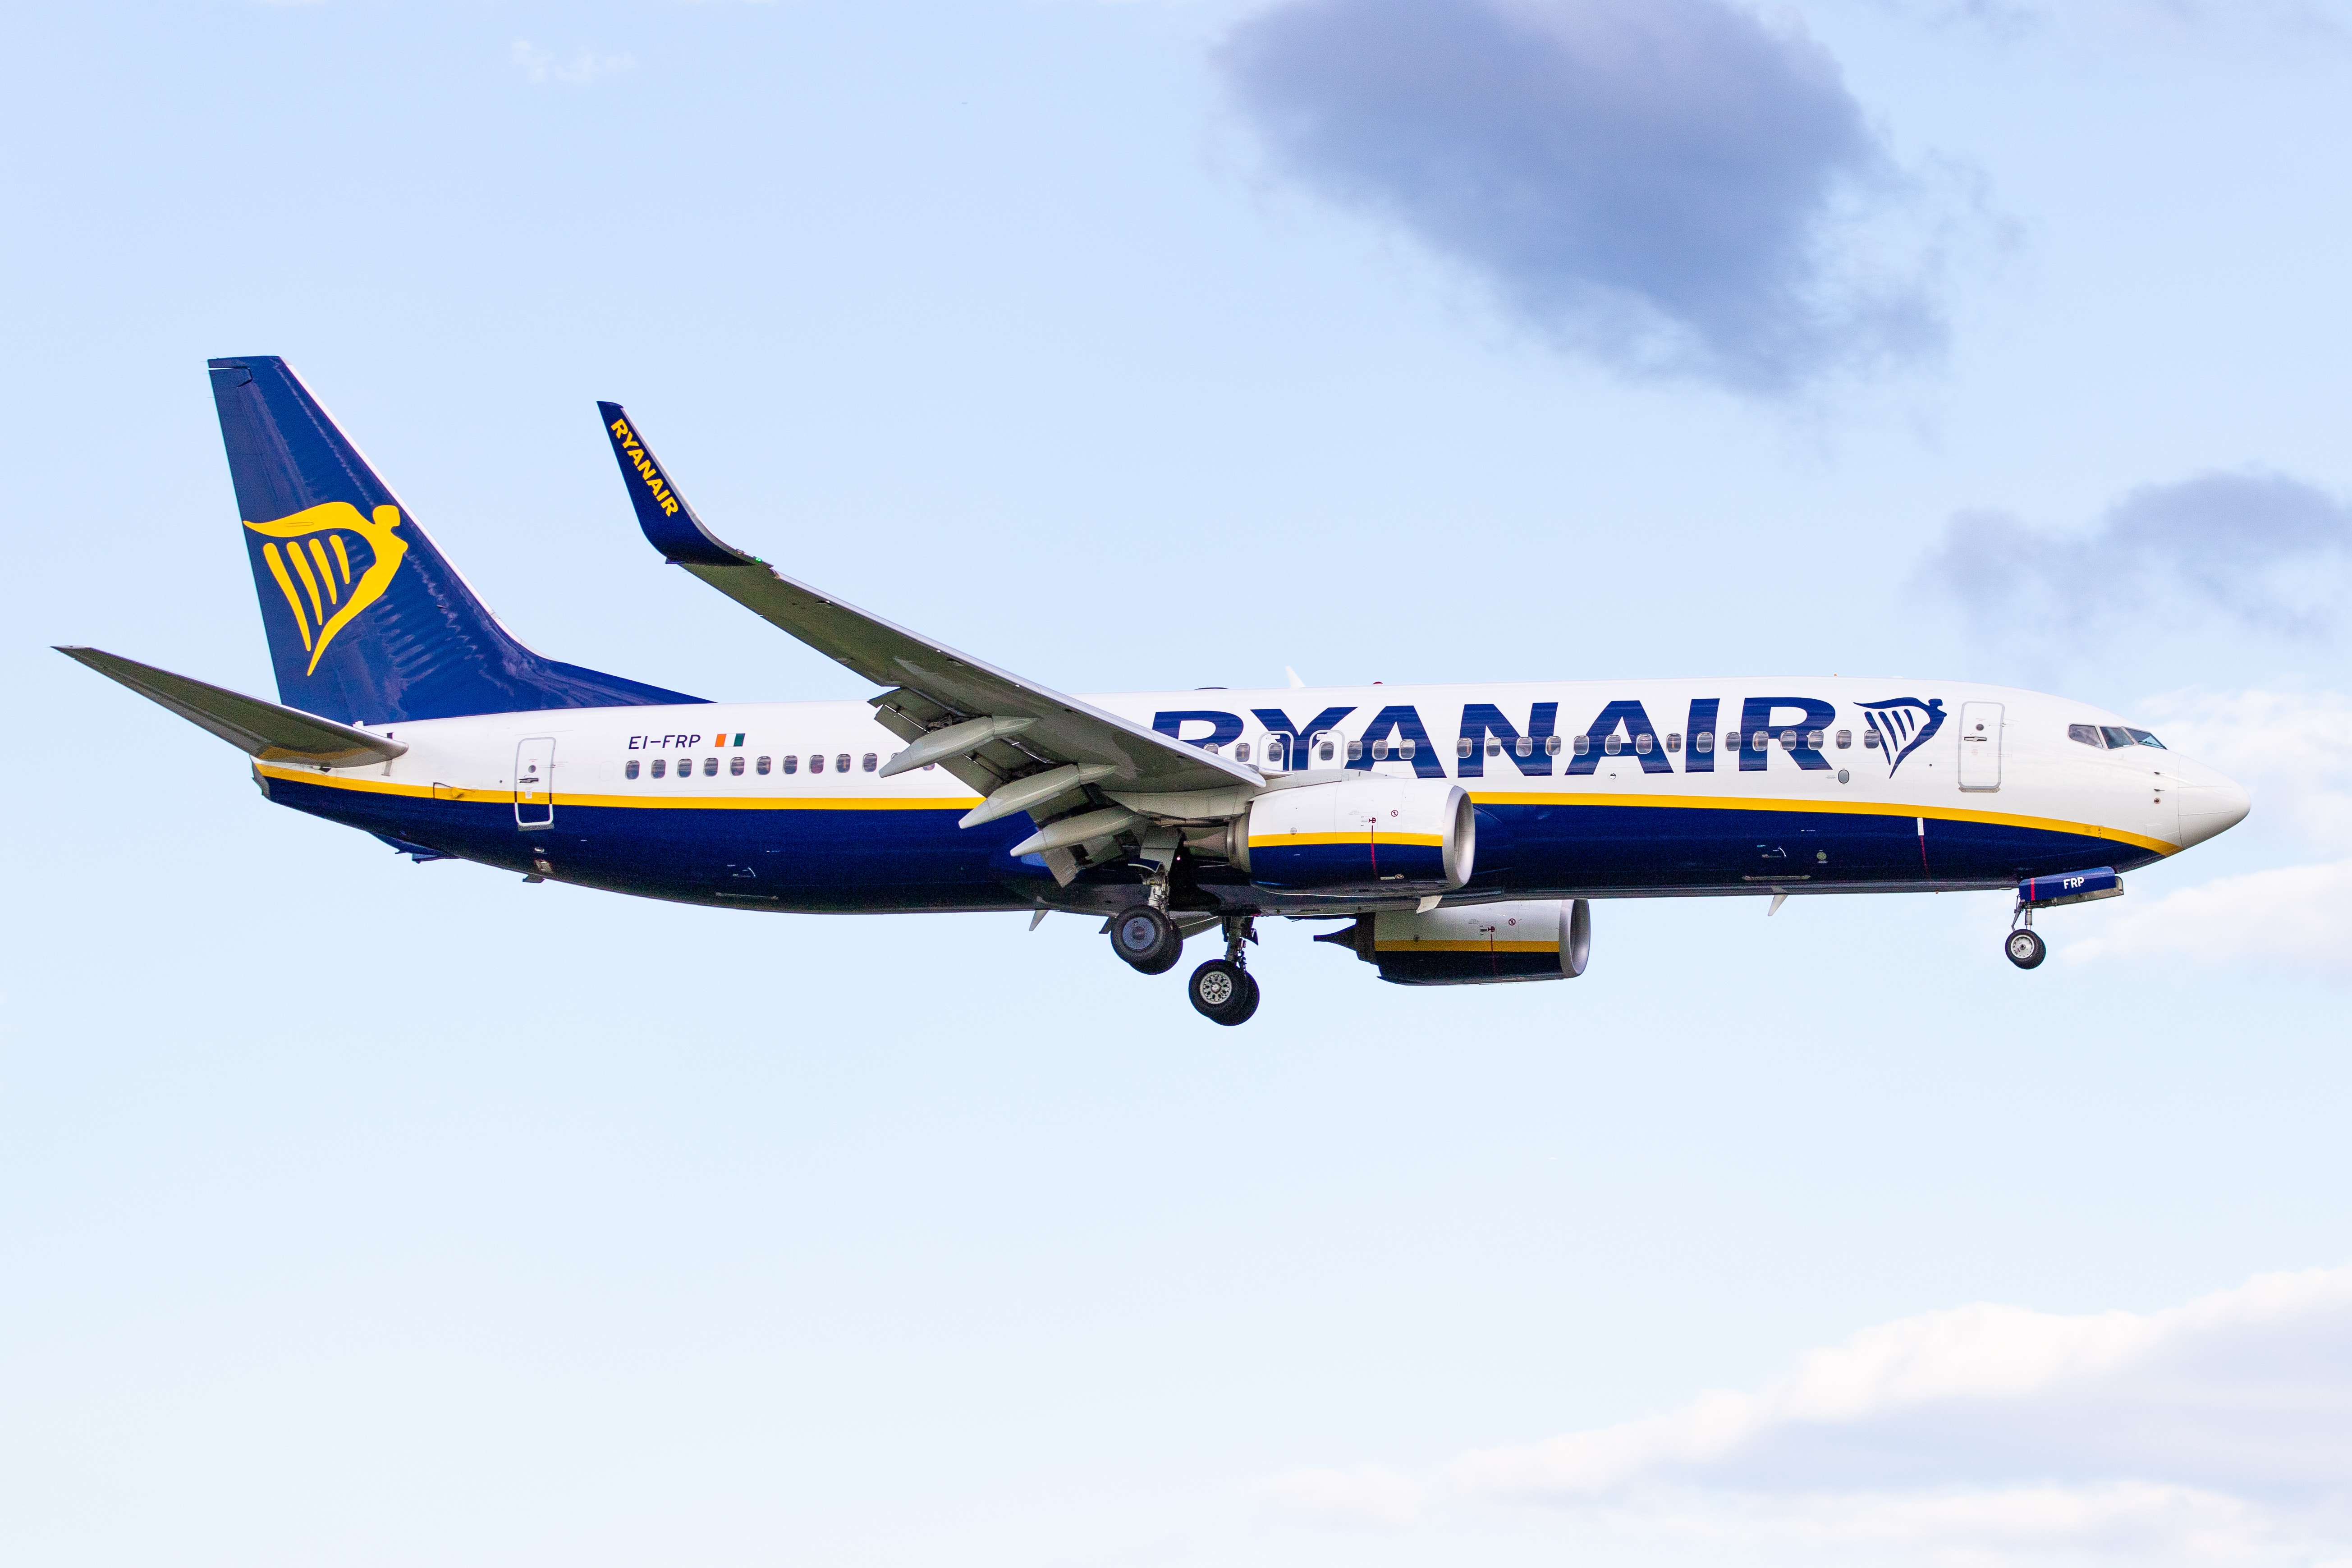 Ryan airline is the largest European budget airline 